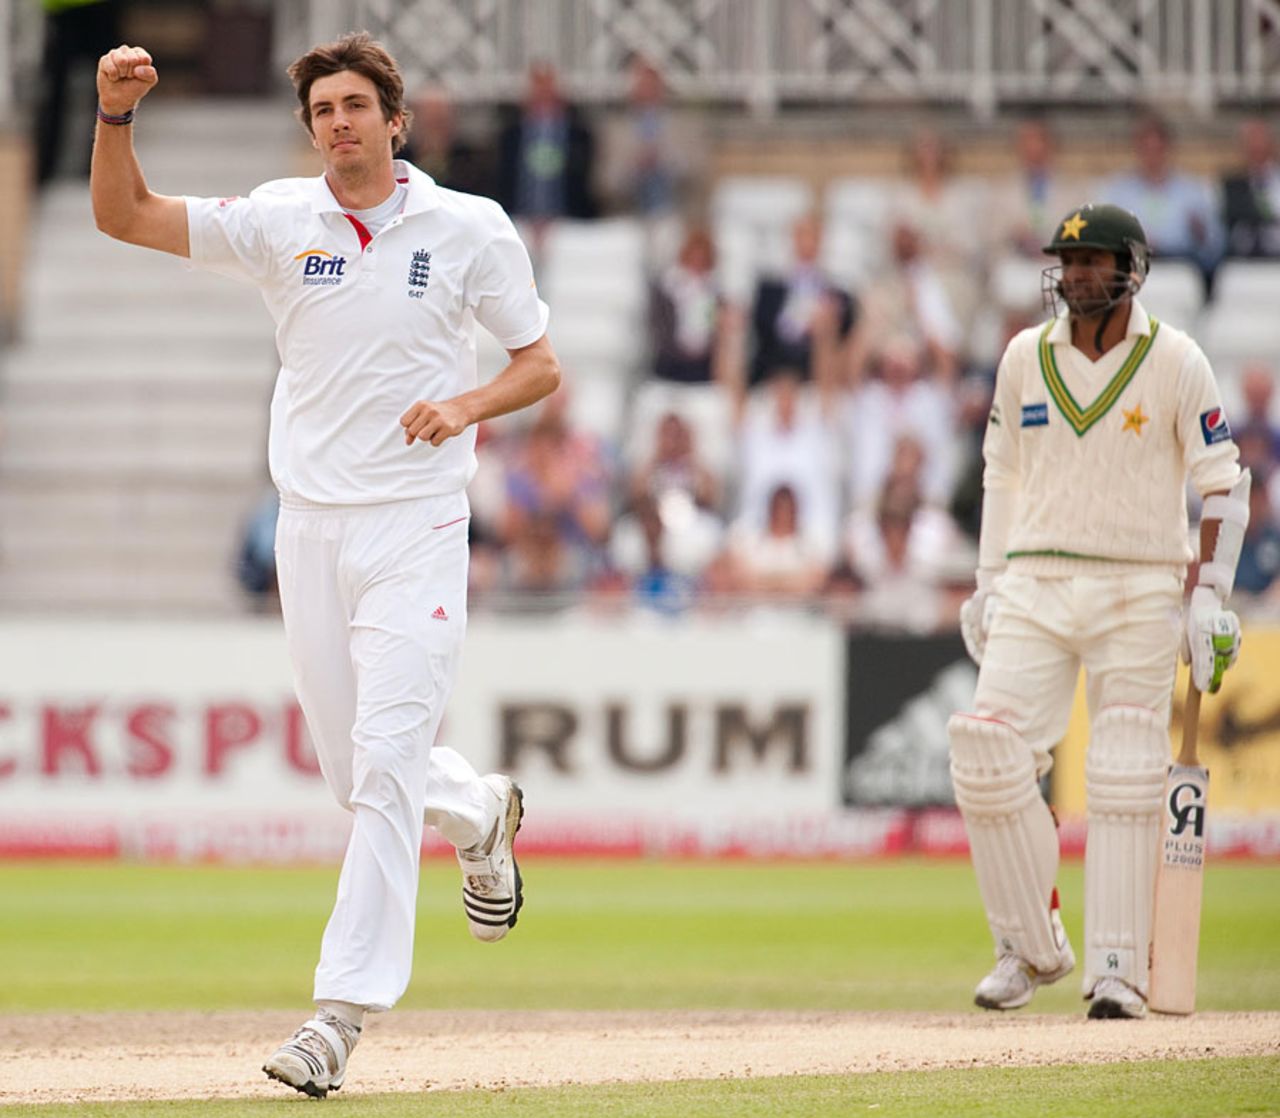 Steven Finn ended Mohammad Aamer's resistance in his first over of the day, England v Pakistan, 1st Test, Trent Bridge, 1 August 2010